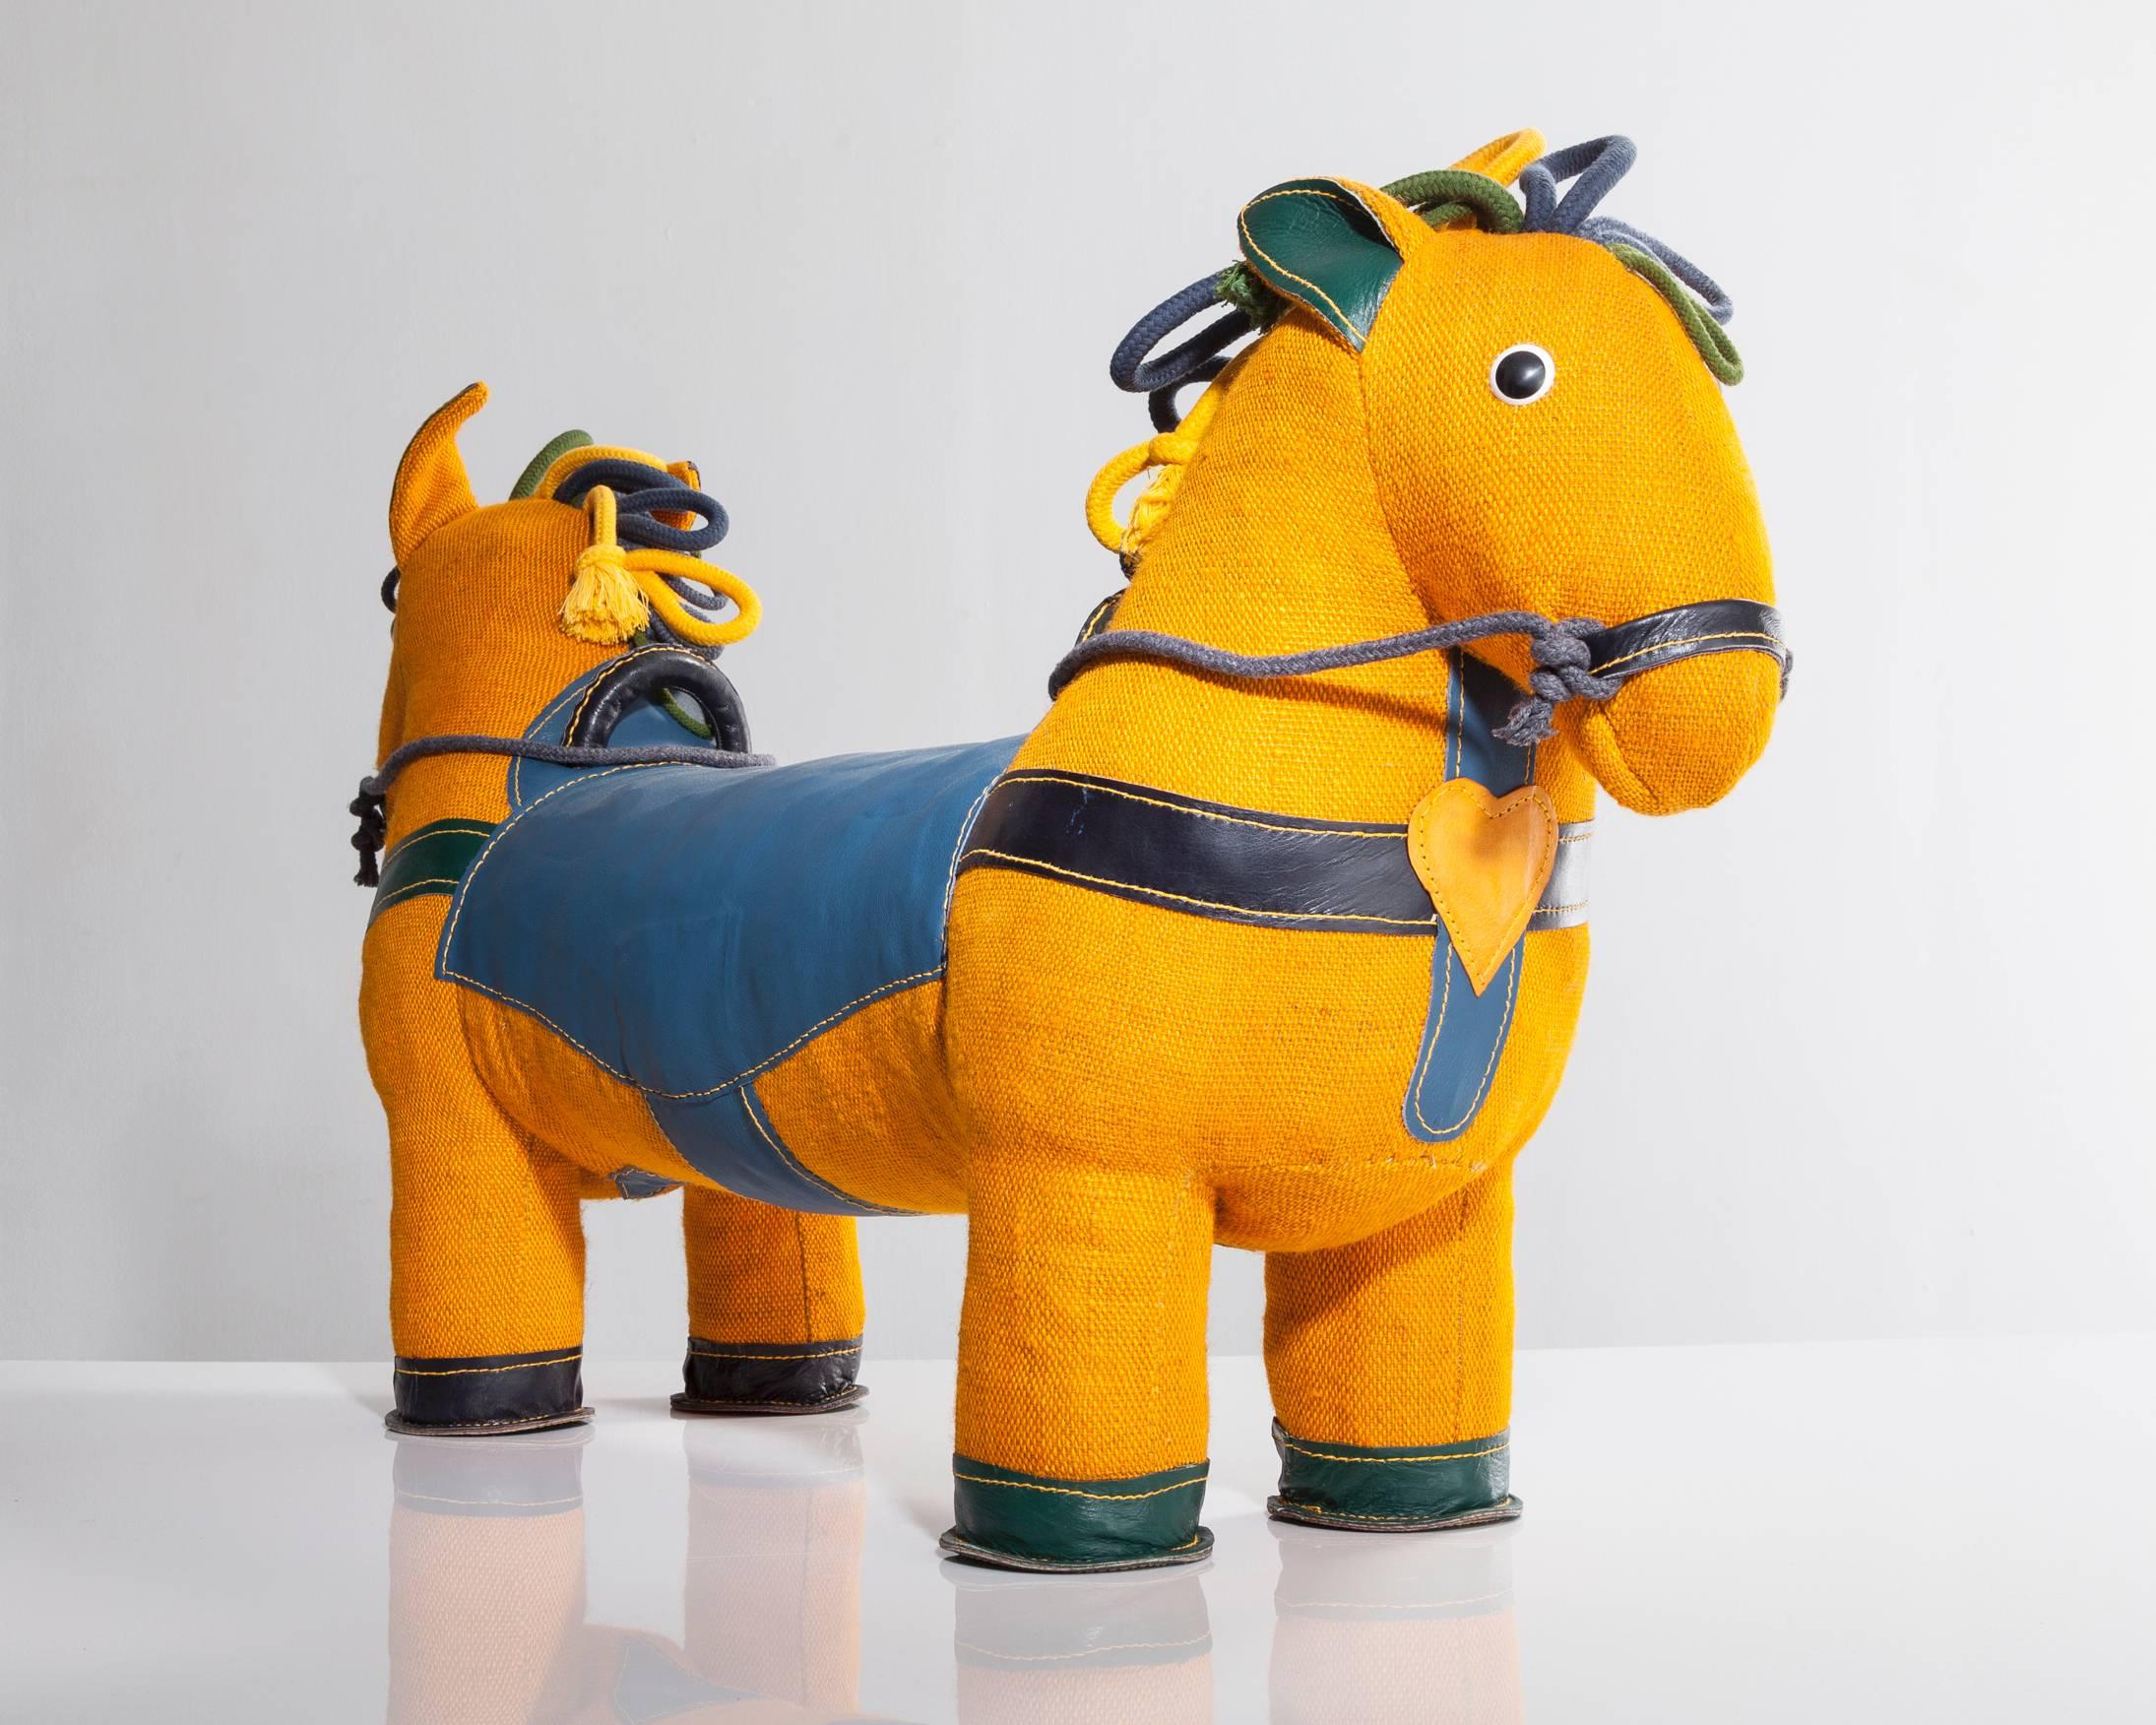 SM5782.

Therapeutic toy double-face pony in yellow jute with leather detailing. Designed and made by Renate Müller, Germany, 2015.